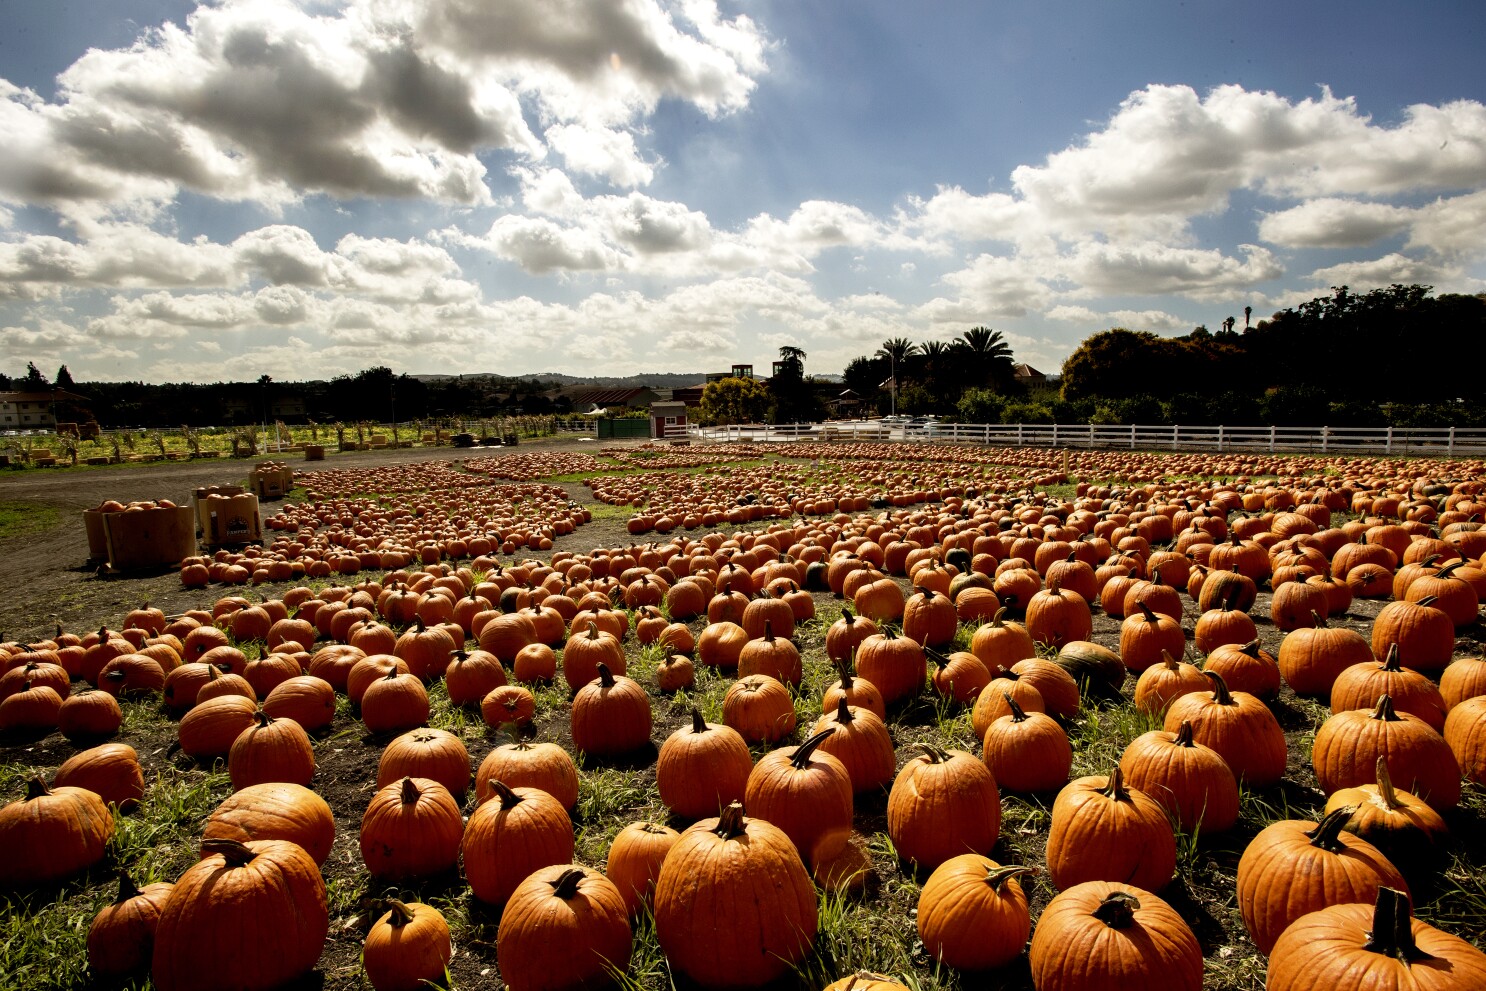 2020 halloween events apple valley ca Pumpkin Patches Are Open For Covid 19 Halloween Los Angeles Times 2020 halloween events apple valley ca